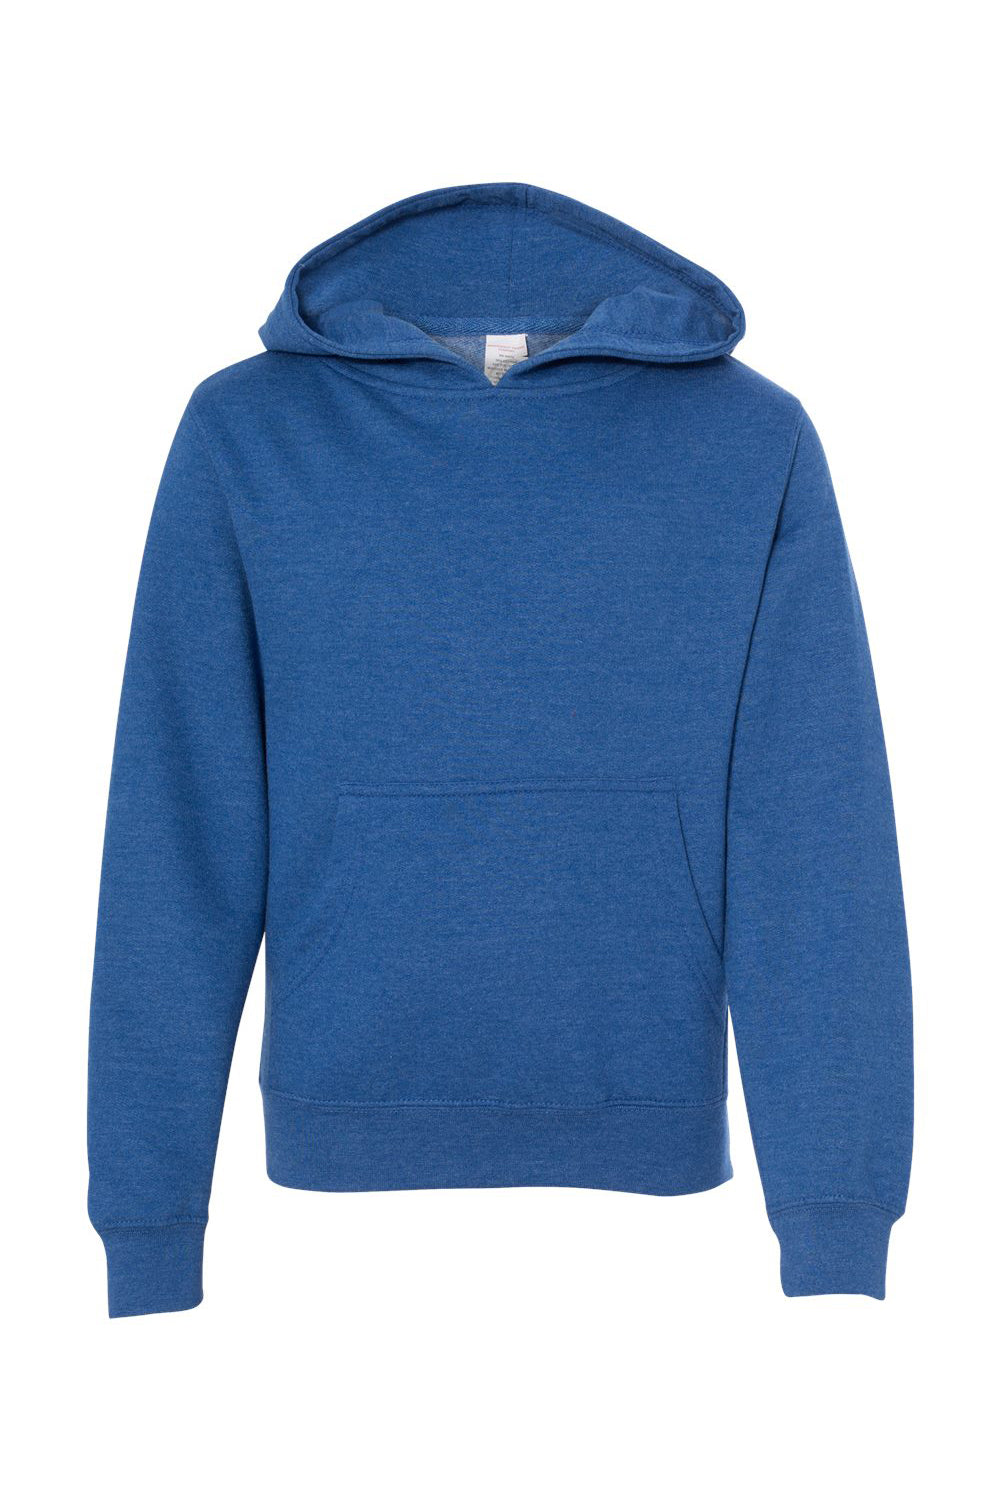 Independent Trading Co. SS4001Y Youth Hooded Sweatshirt Hoodie Heather Royal Blue Flat Front